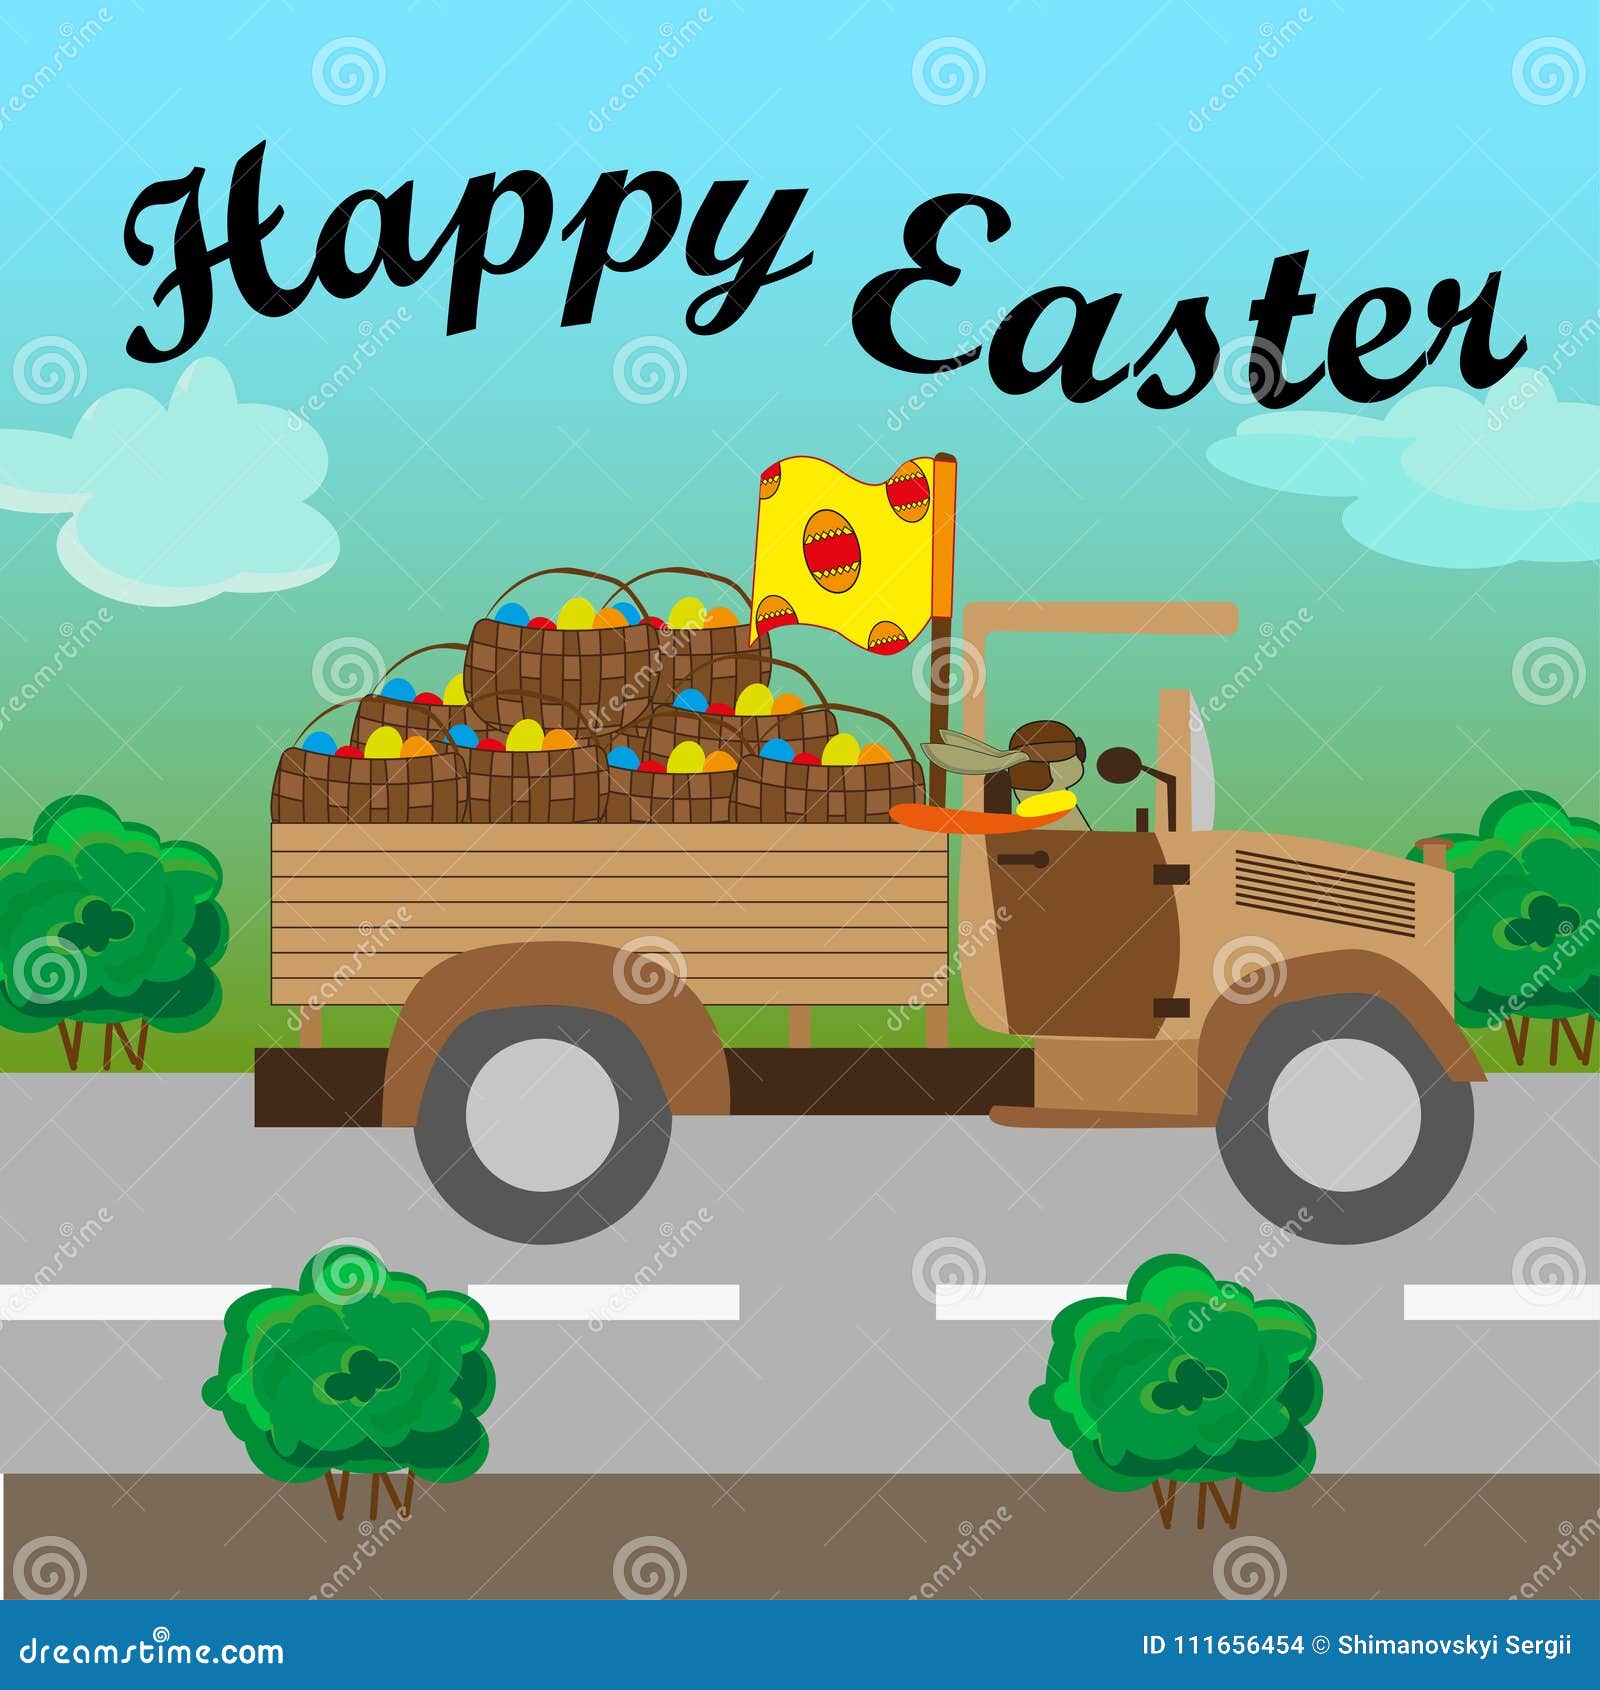 Truck Filled With Easter Eggs and Happy Easter In Black Lettering